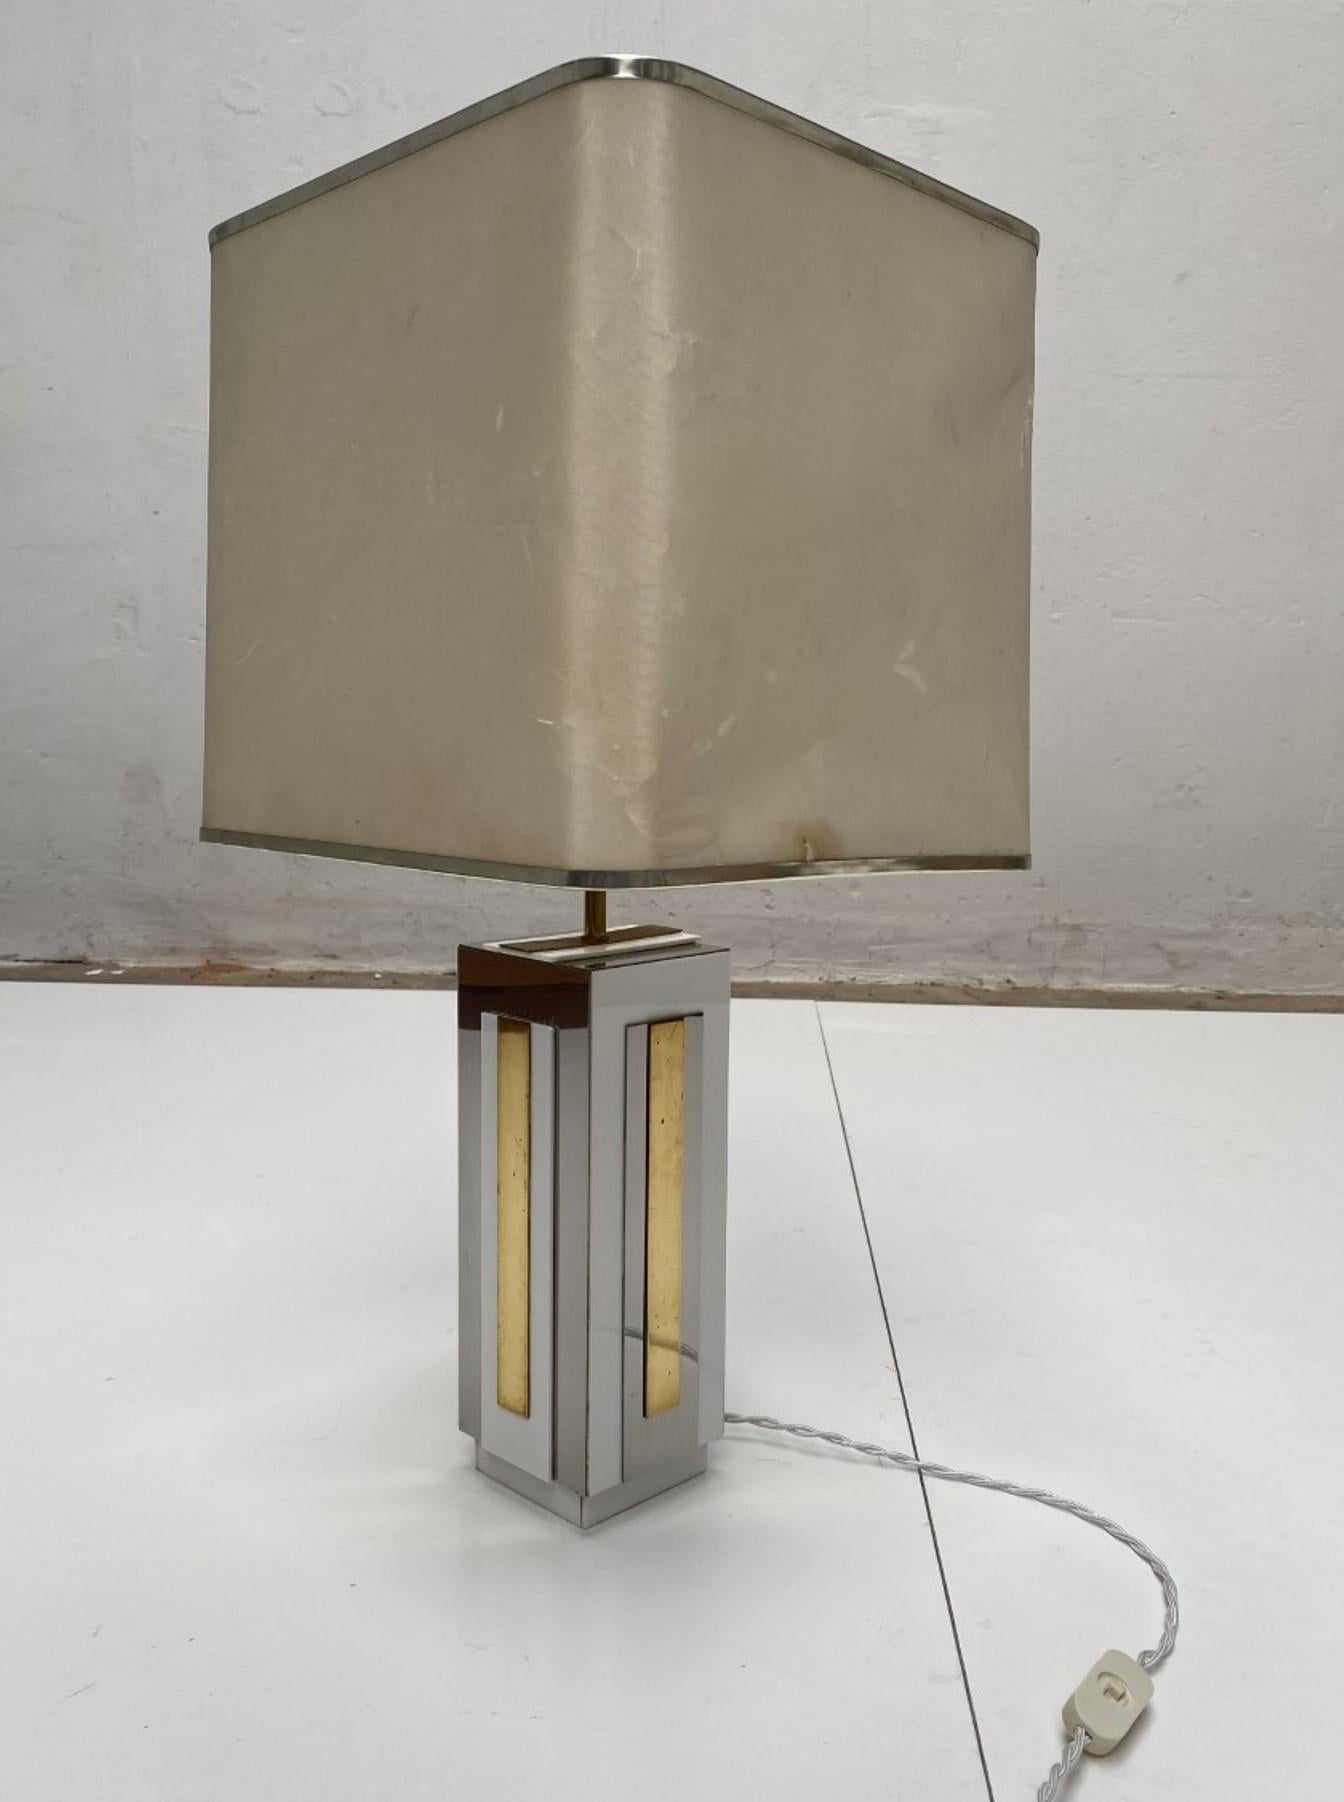 Sculptural Relief Table Lamp by Sculptor 'PH Jean' 1970 Brass Inox Lucite Signed For Sale 2